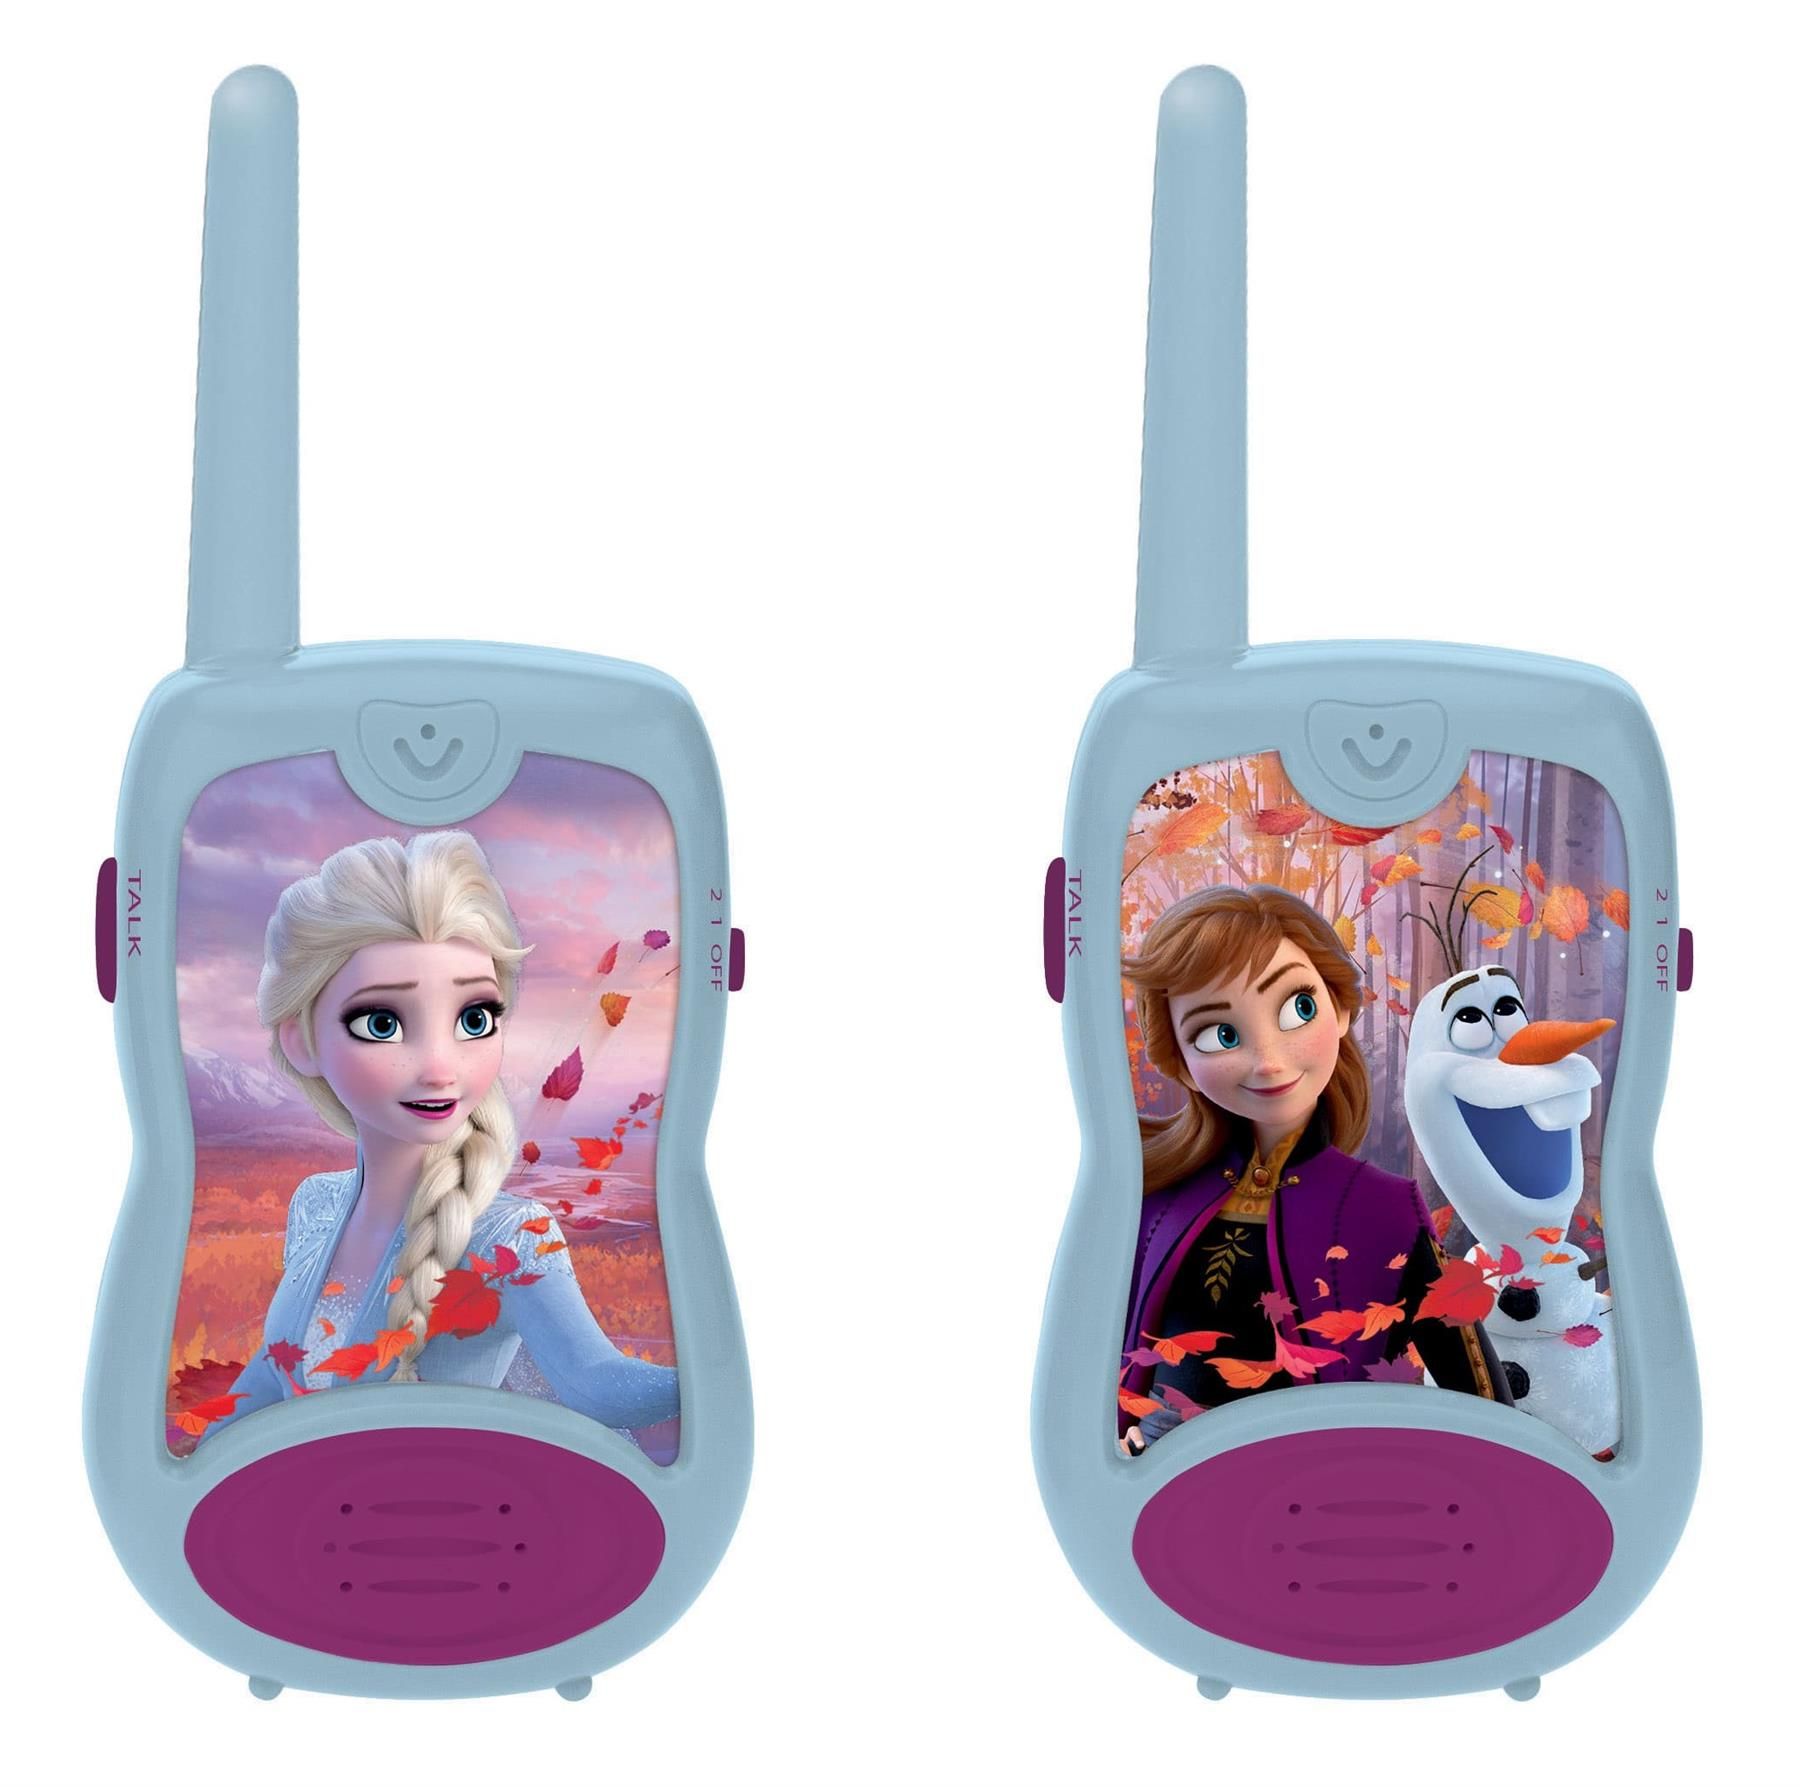 Naar behoren ring Levendig Buy Disney Frozen Walkie Talkies at BargainMax | Free Delivery over £9.99  and Buy Now, Pay Later with Klarna, ClearPay & Laybuy | Bargain Max